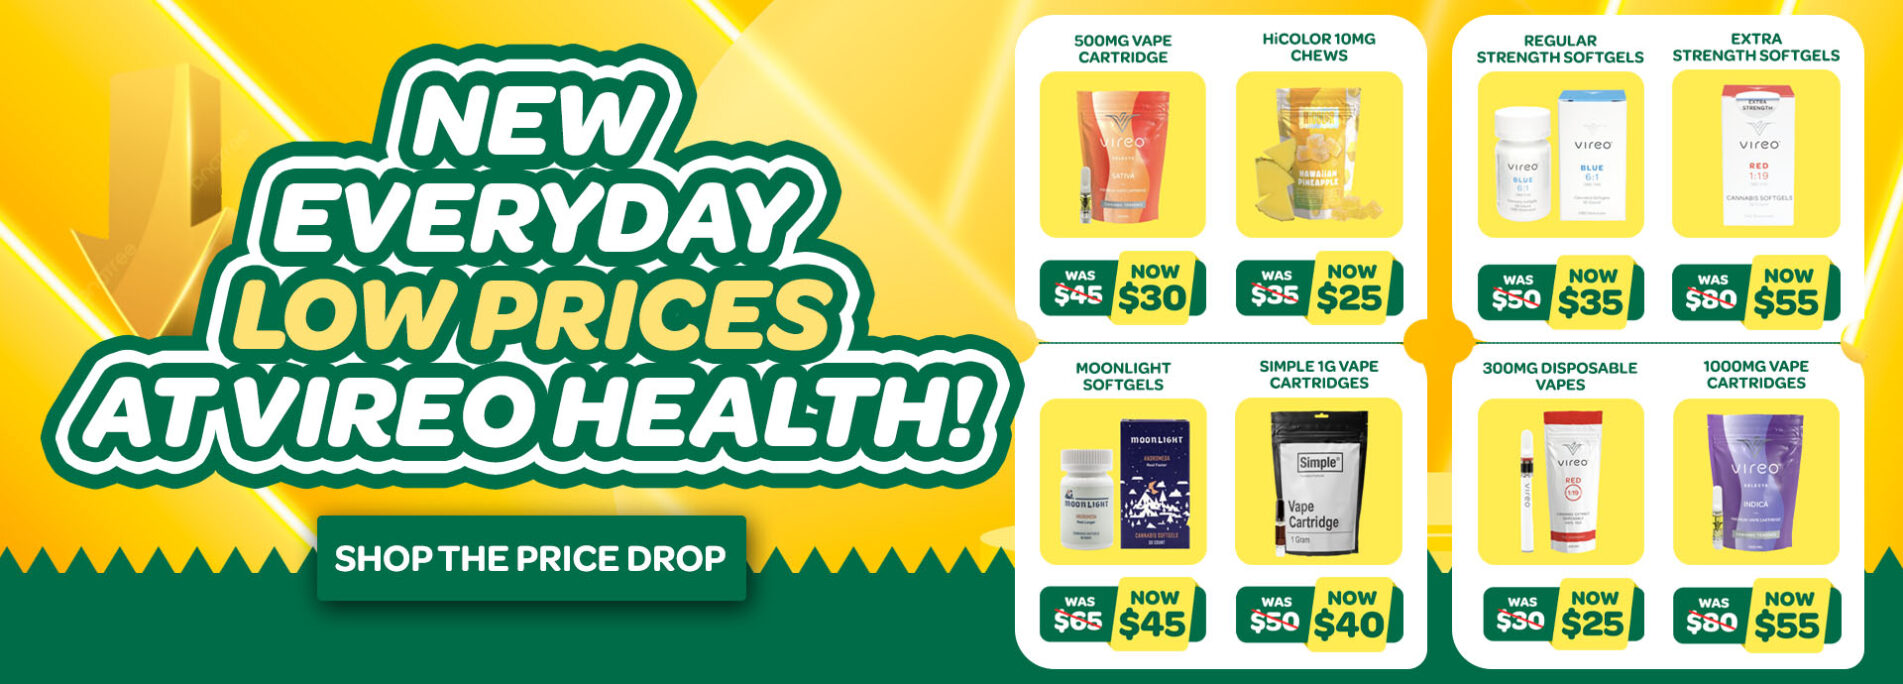 New Everyday Low Prices at Vireo Health!